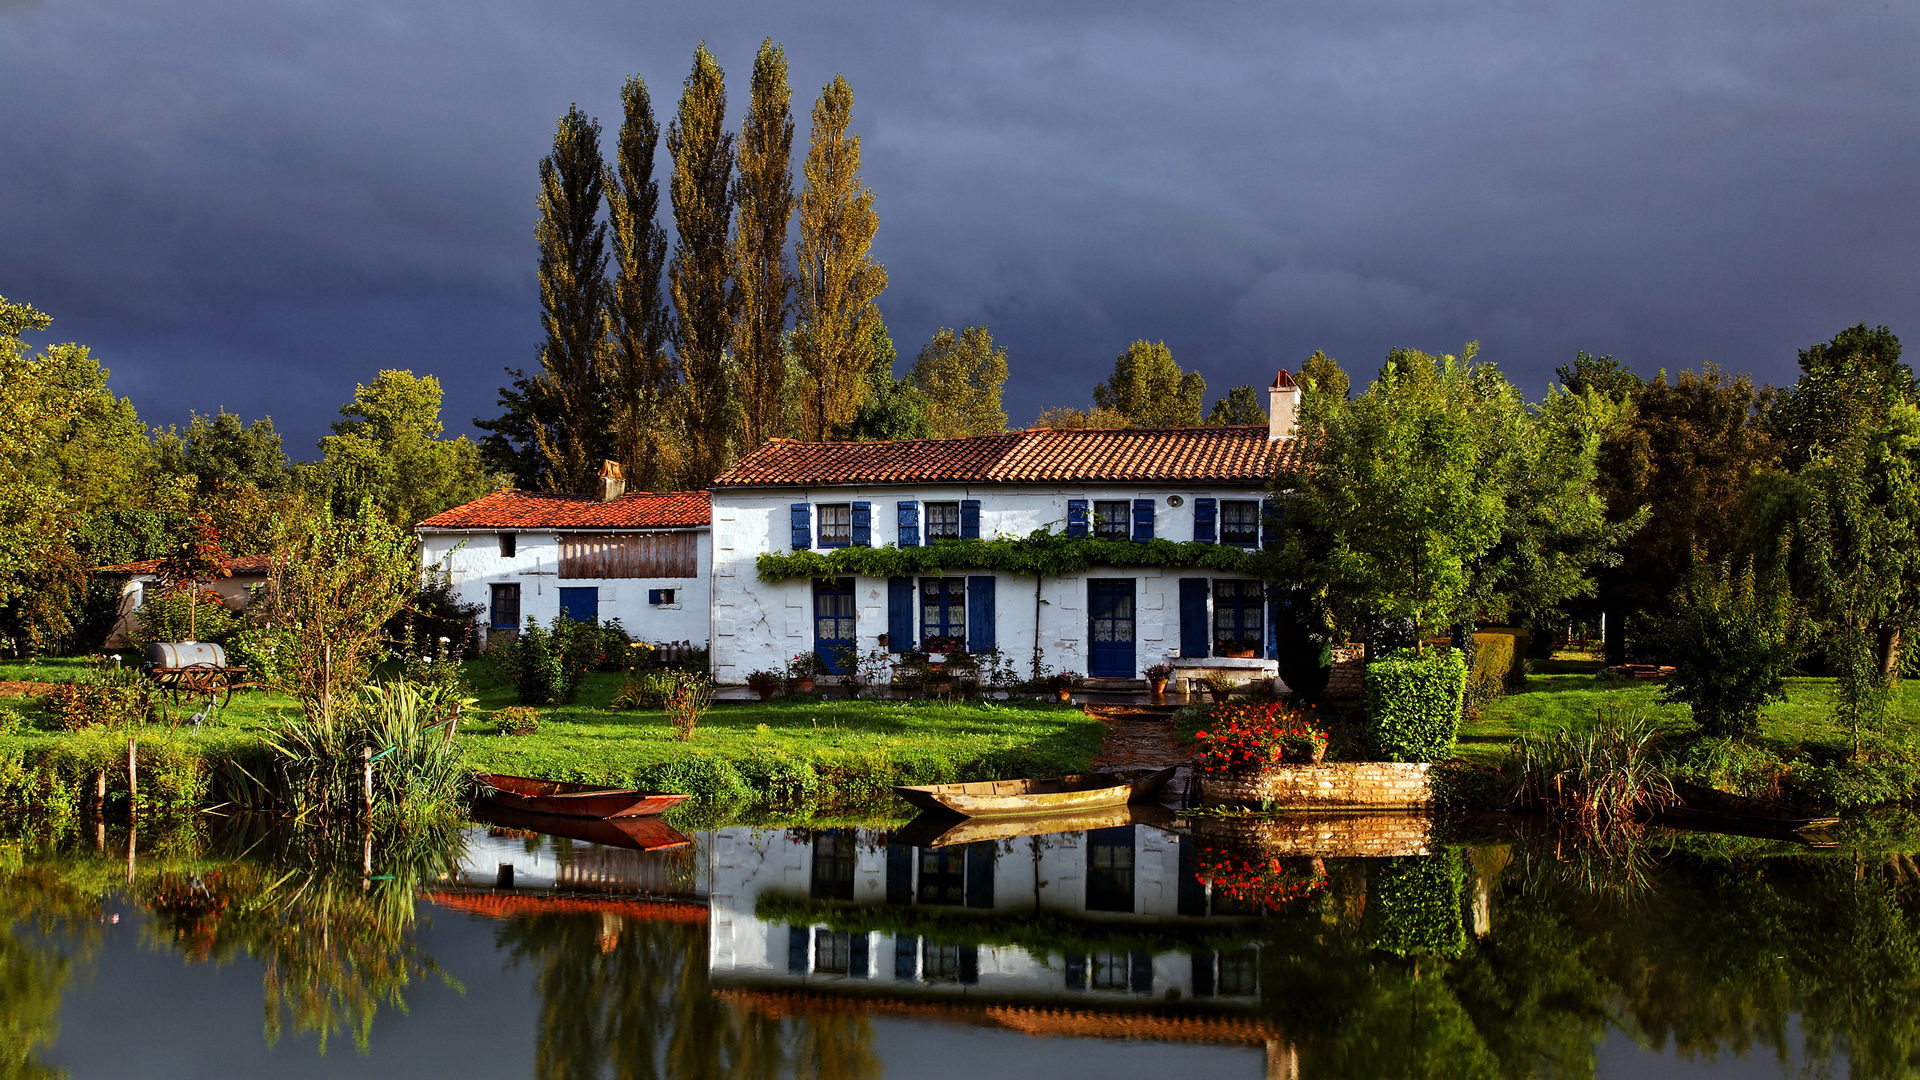 sky, photography, bush, water, old, grass, garden, mansion, house, lake, building, tree, boat, reflection, man made, landscape